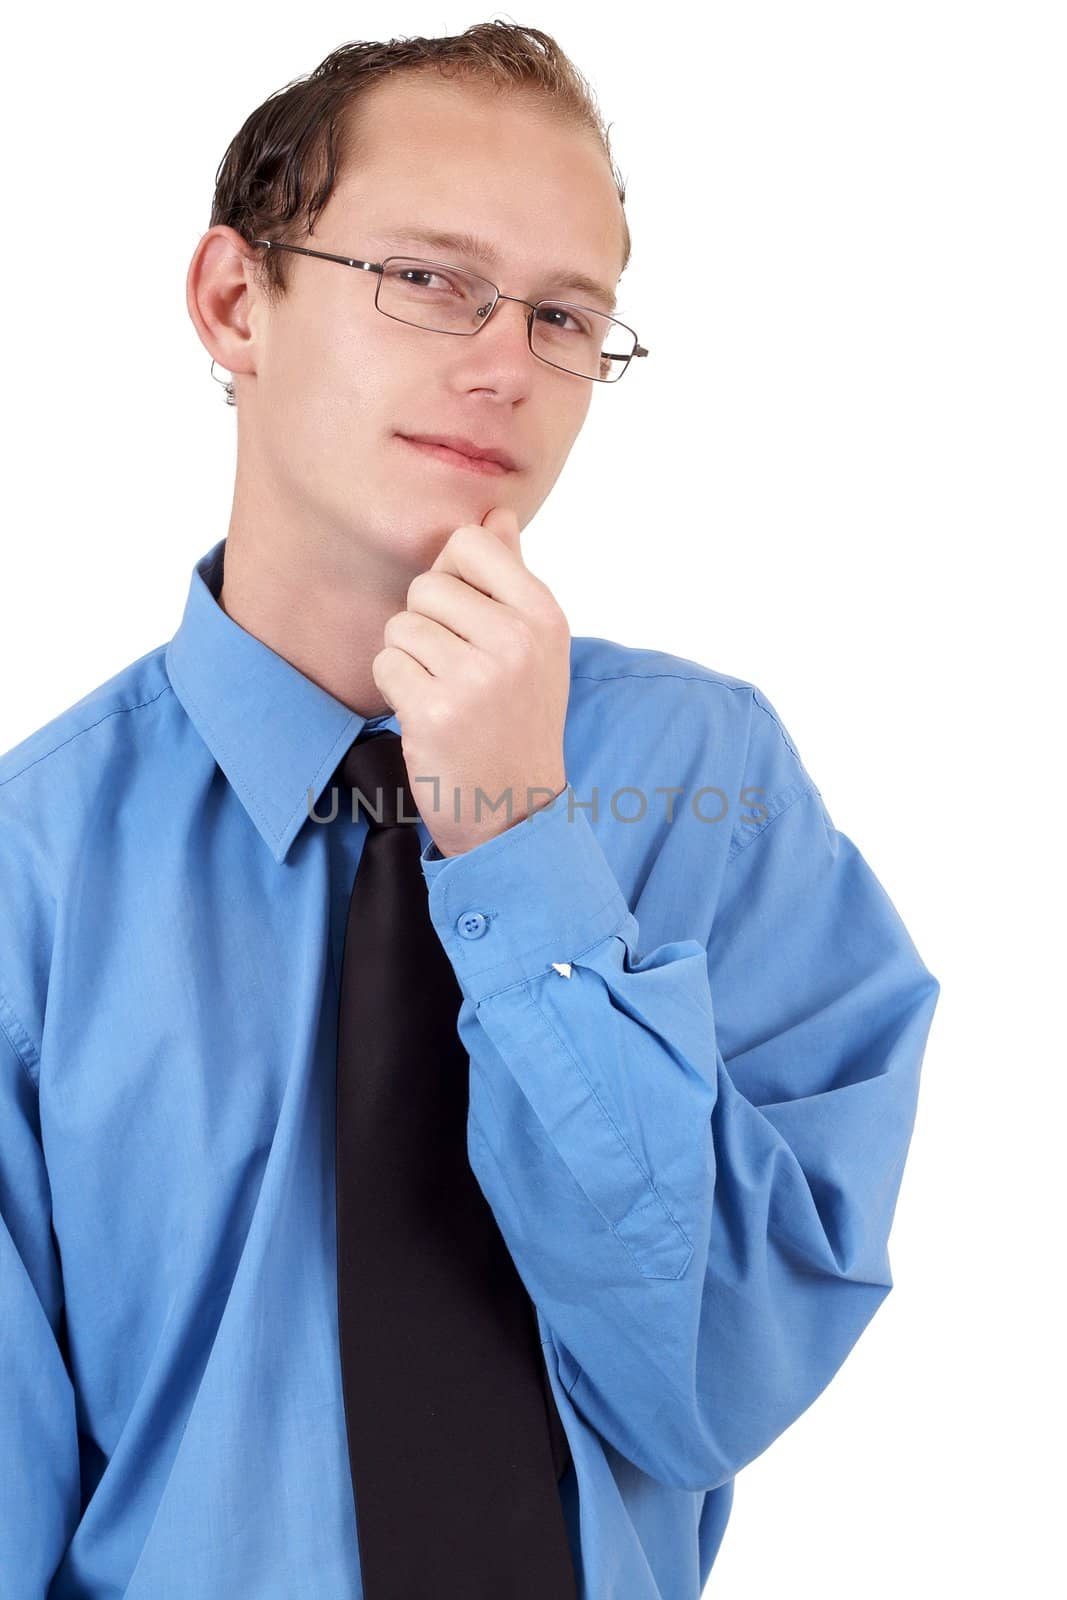 Young successful businessman wearing office clothes rubbing his chin in thought. Isolated on white background